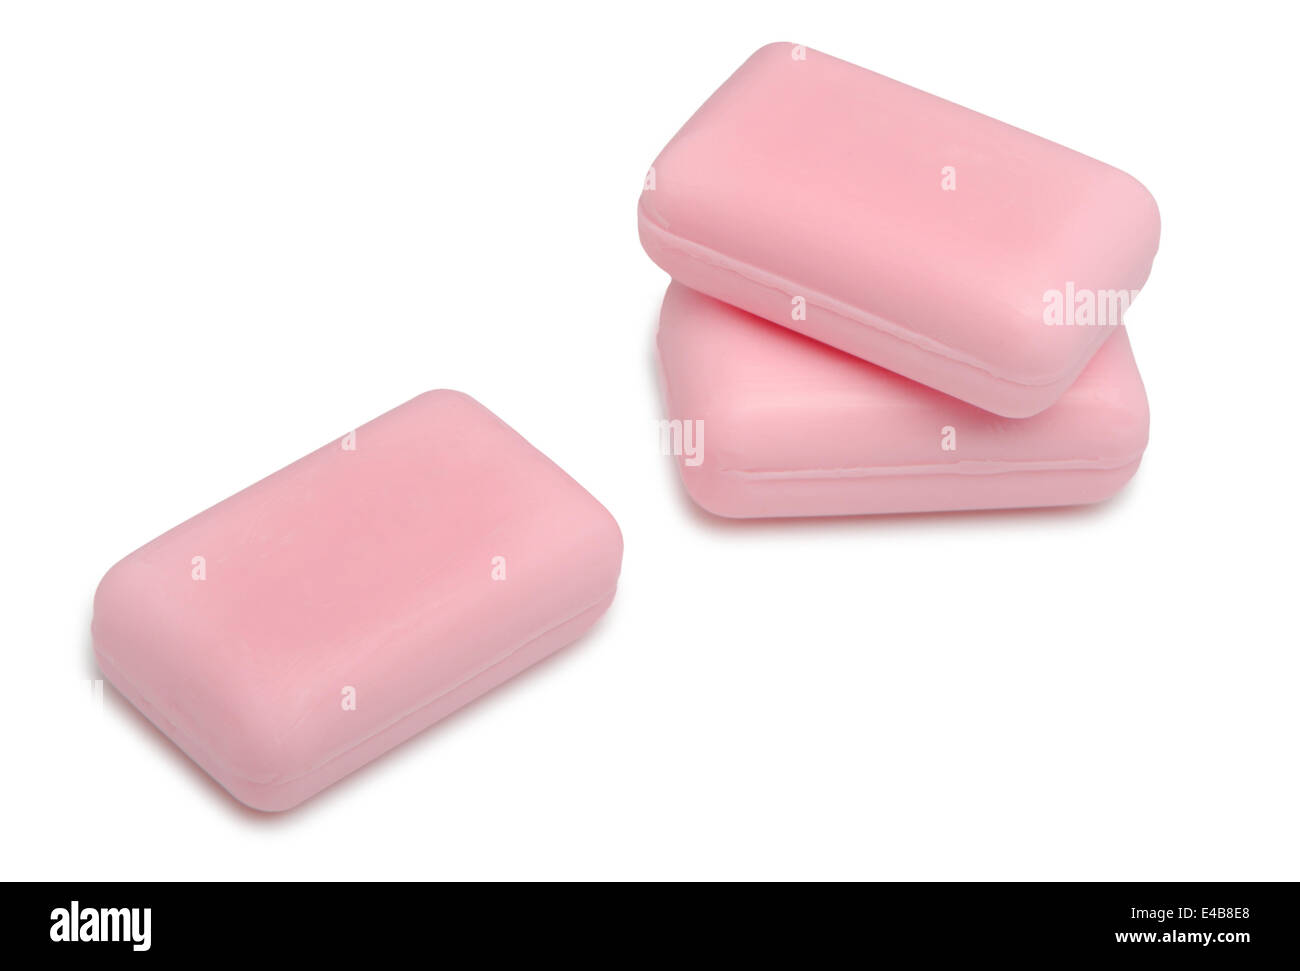 Three soaps of pink color Stock Photo